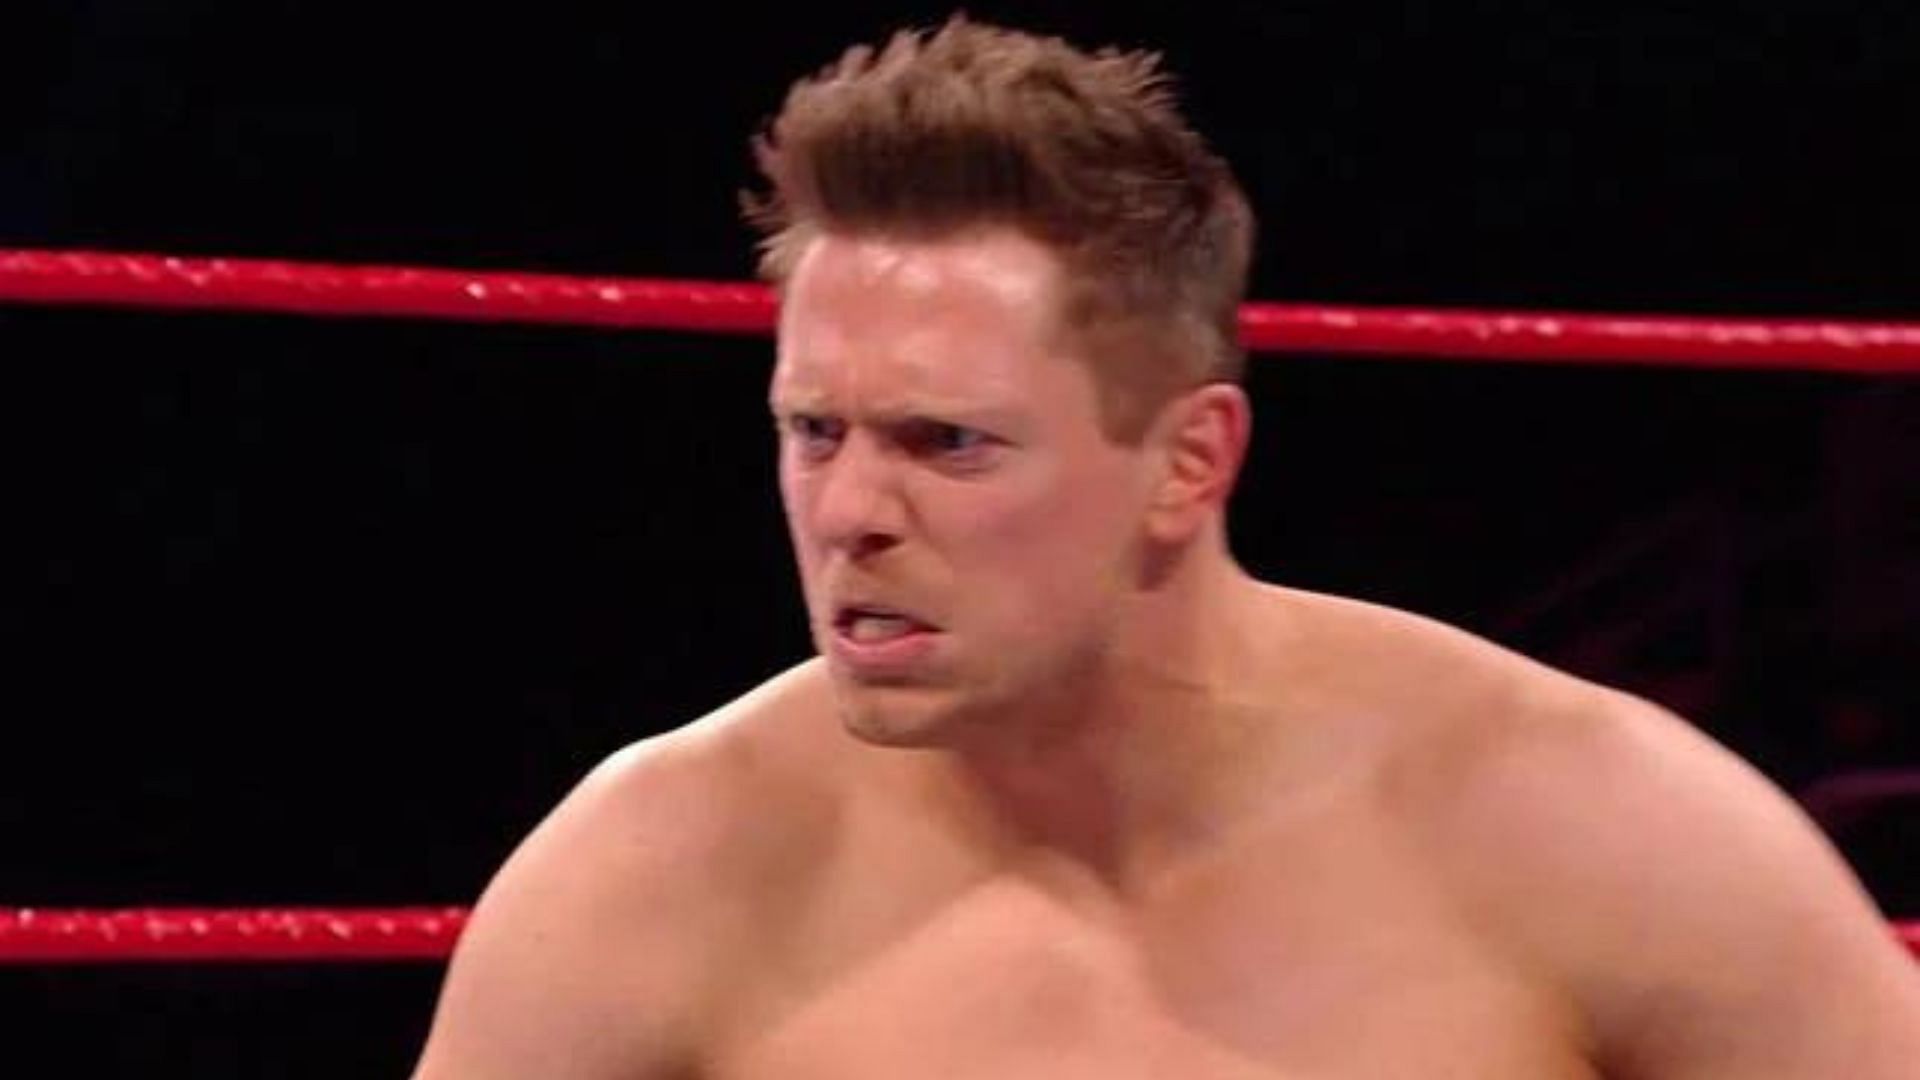 The Miz is feuding with Dexter Lumis in WWE